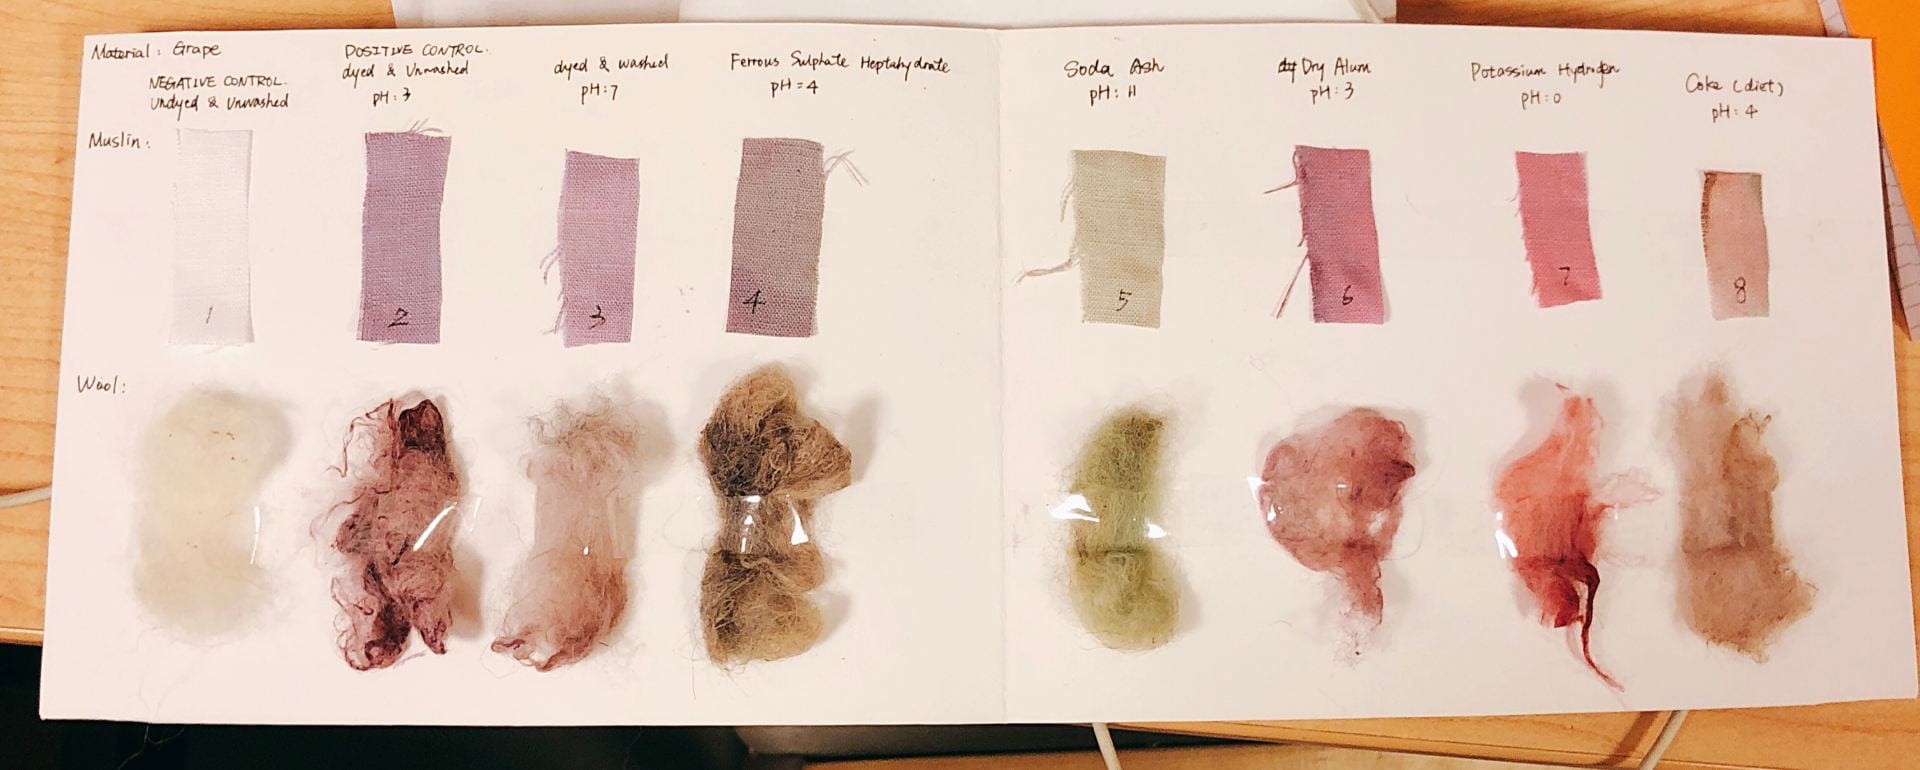 Sustainable System: Natural dye